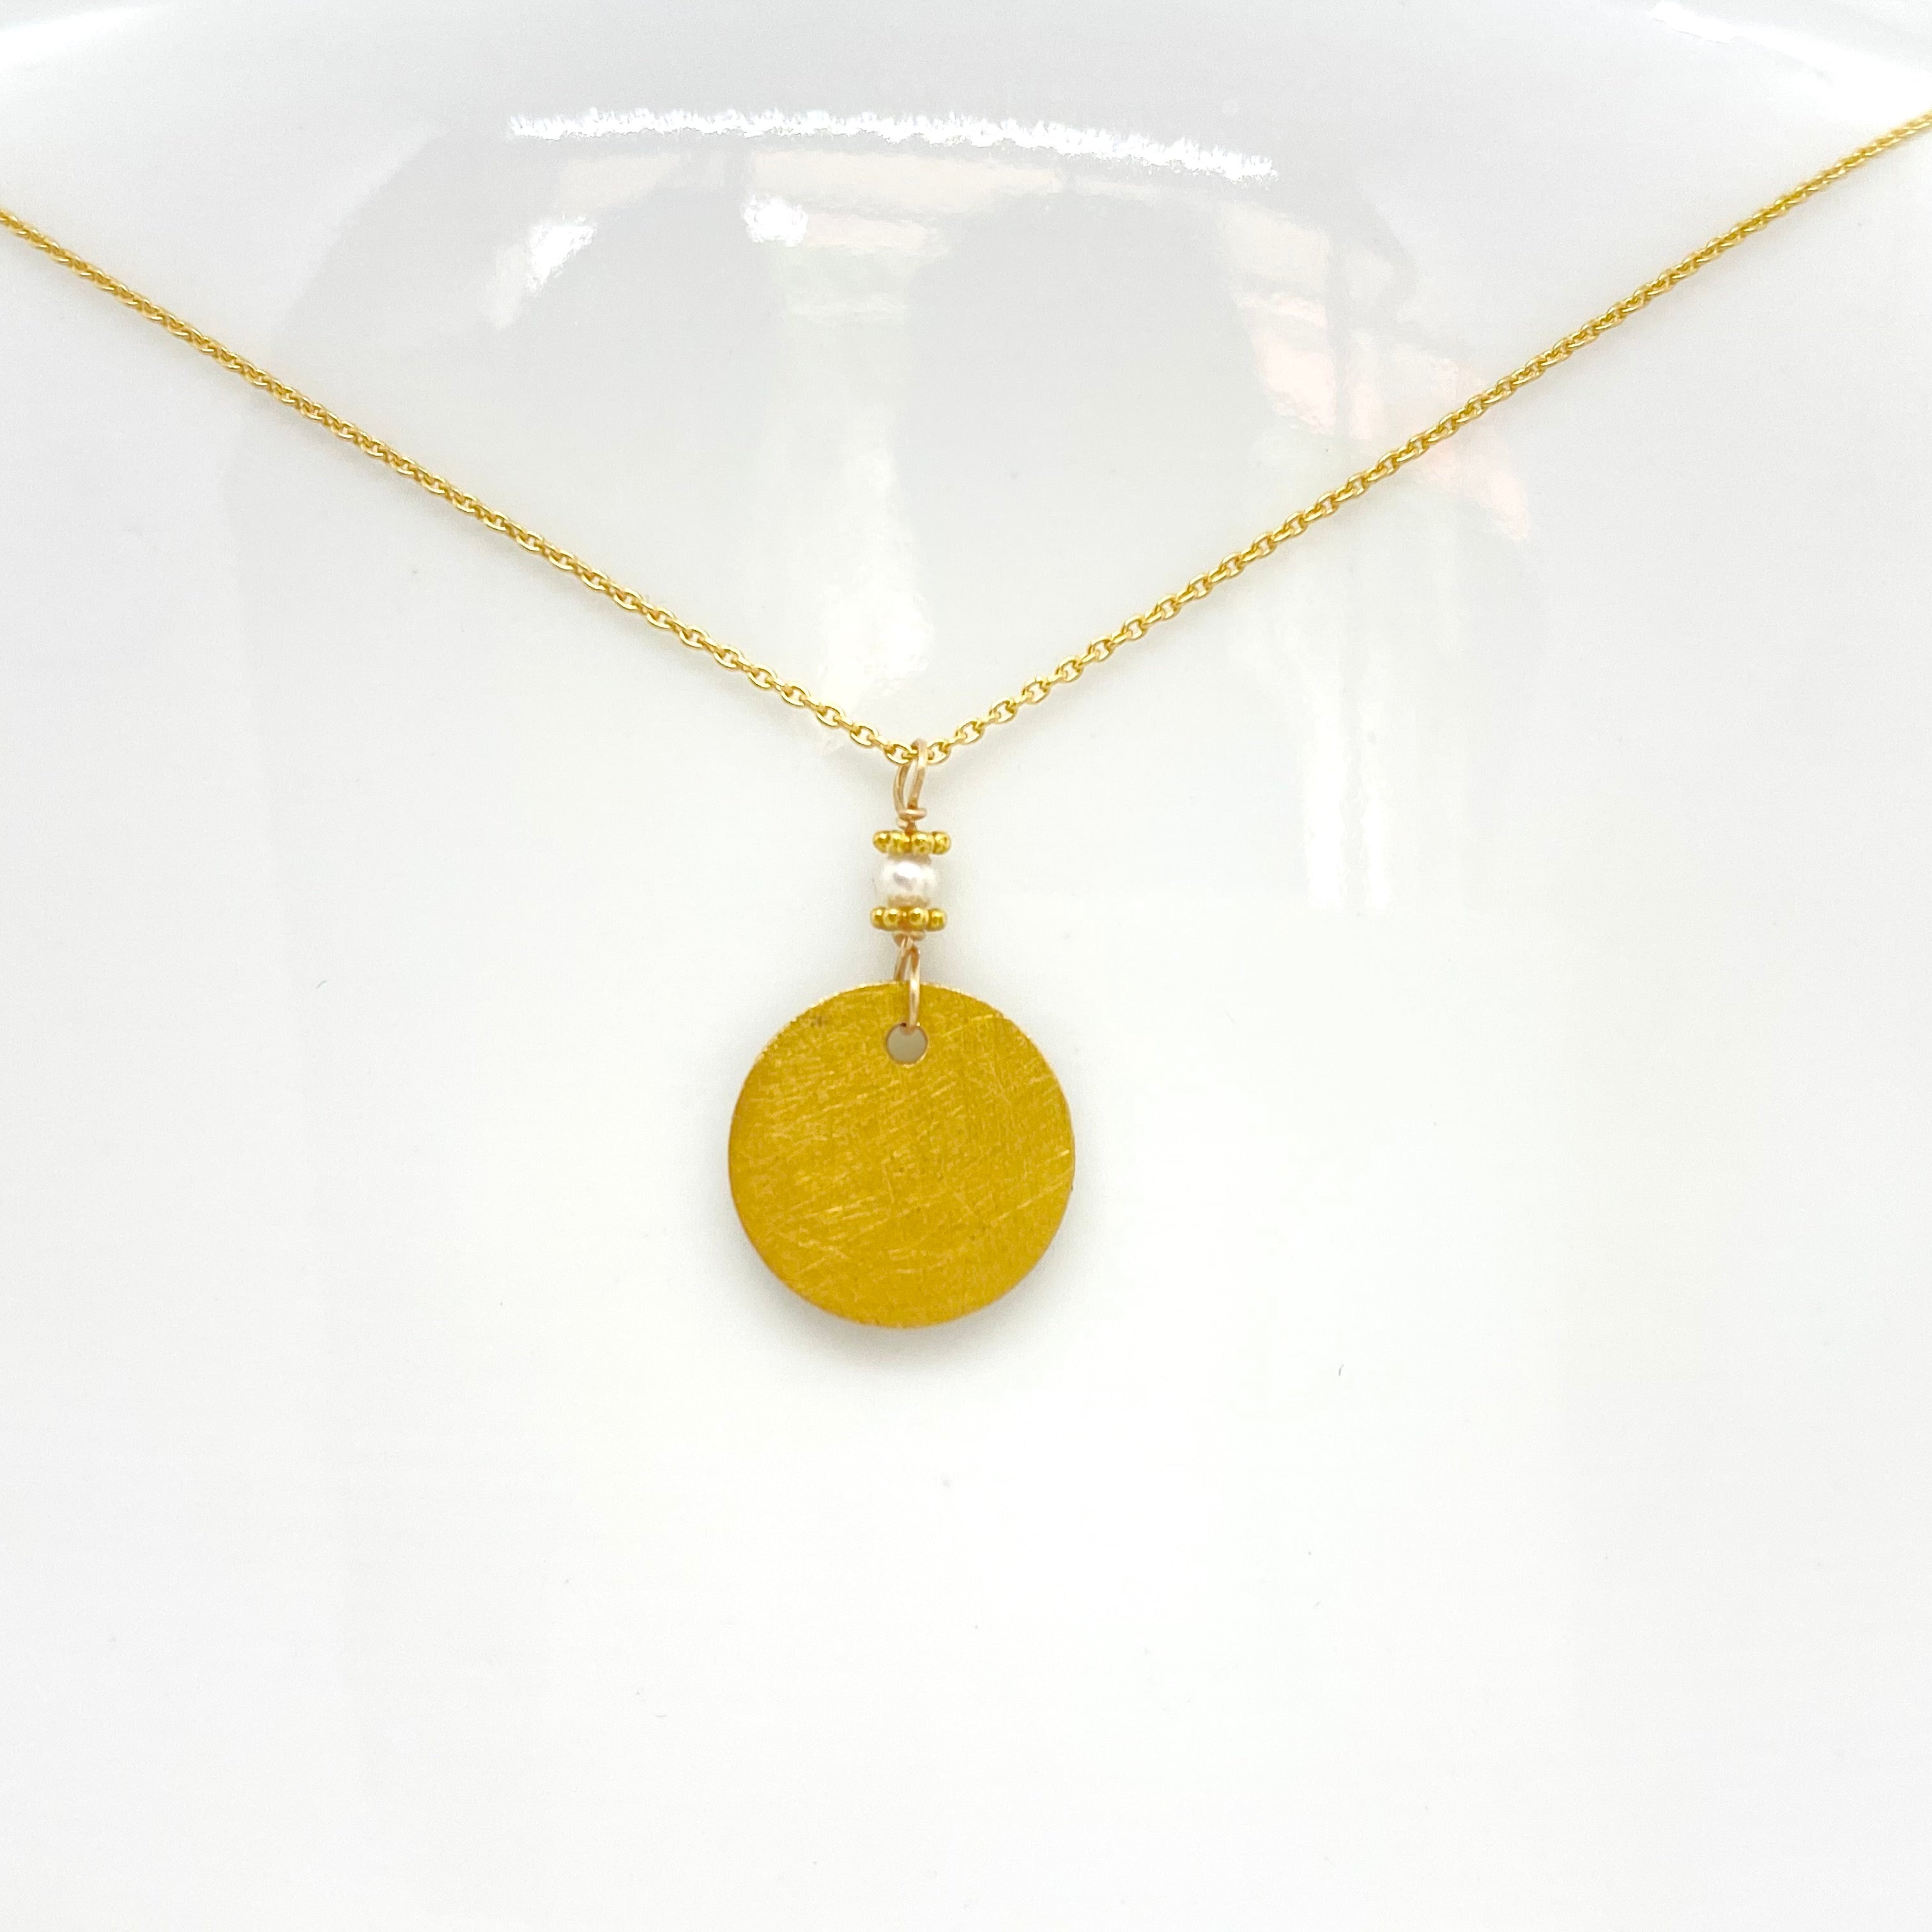 14k Gold Chain Necklace w/ 18k Gold Round Pendant, 18k Gold Daisies & Freshwater Pearl